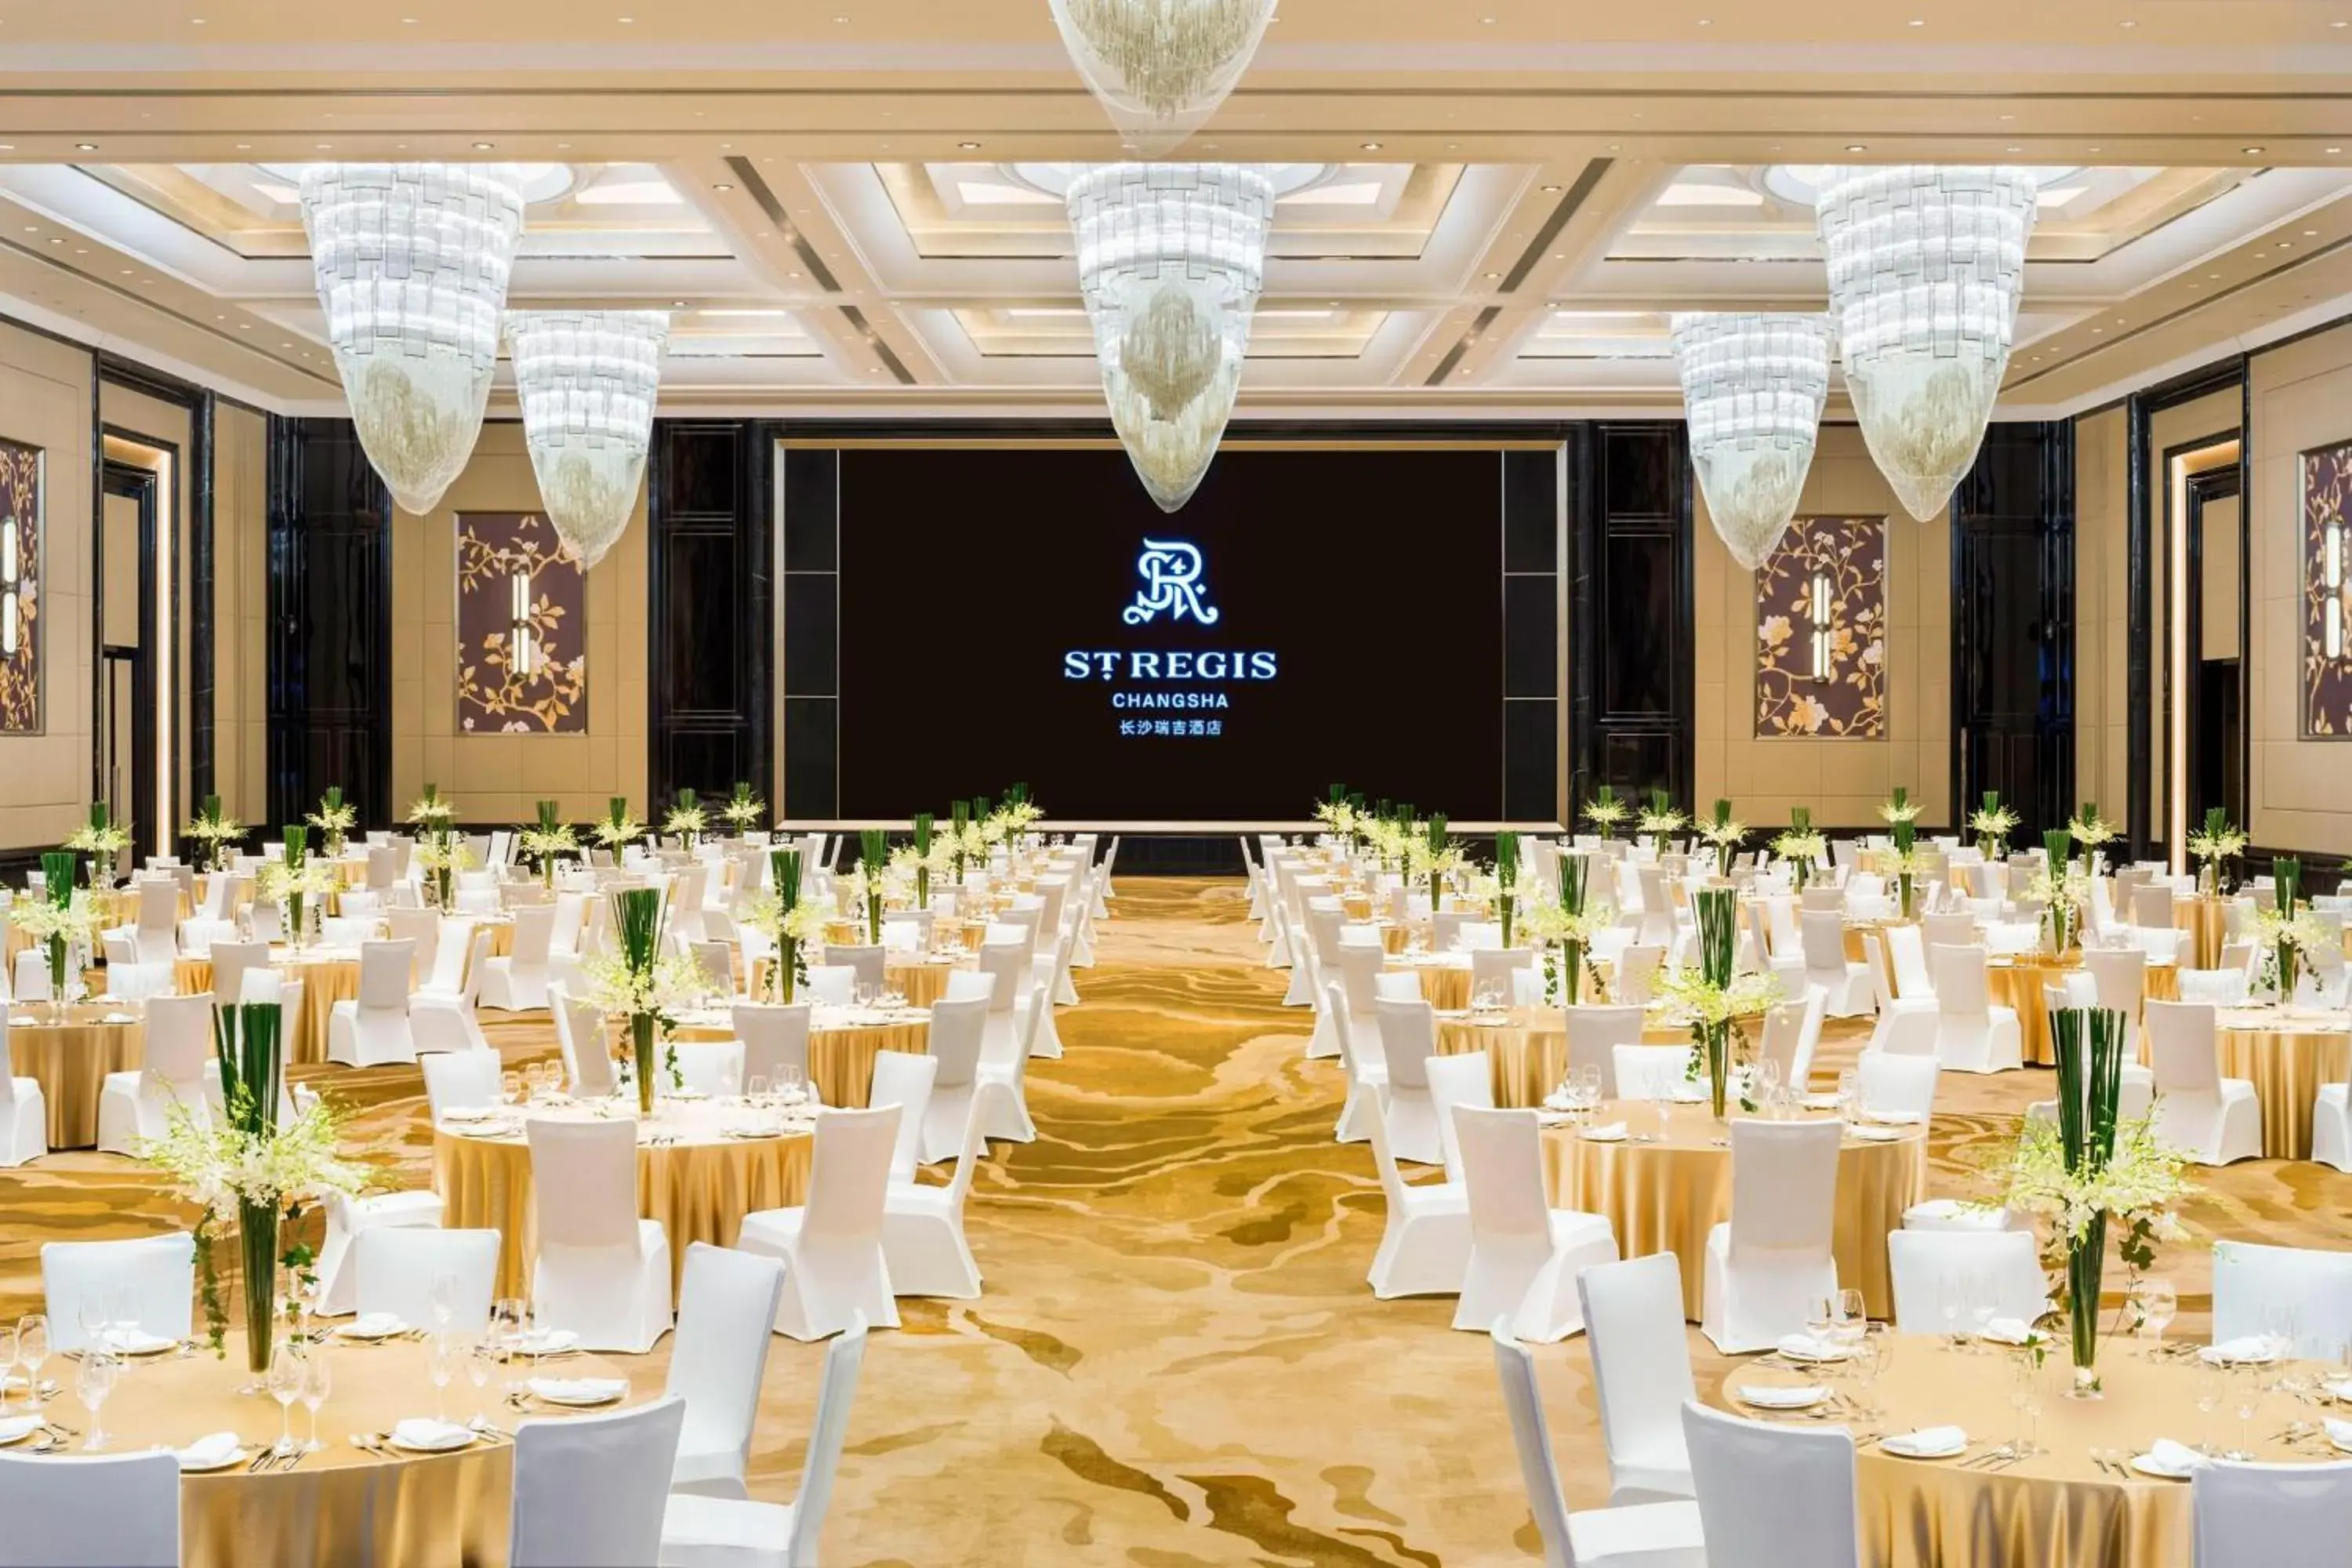 Meeting/conference room, Banquet Facilities in The St. Regis Changsha